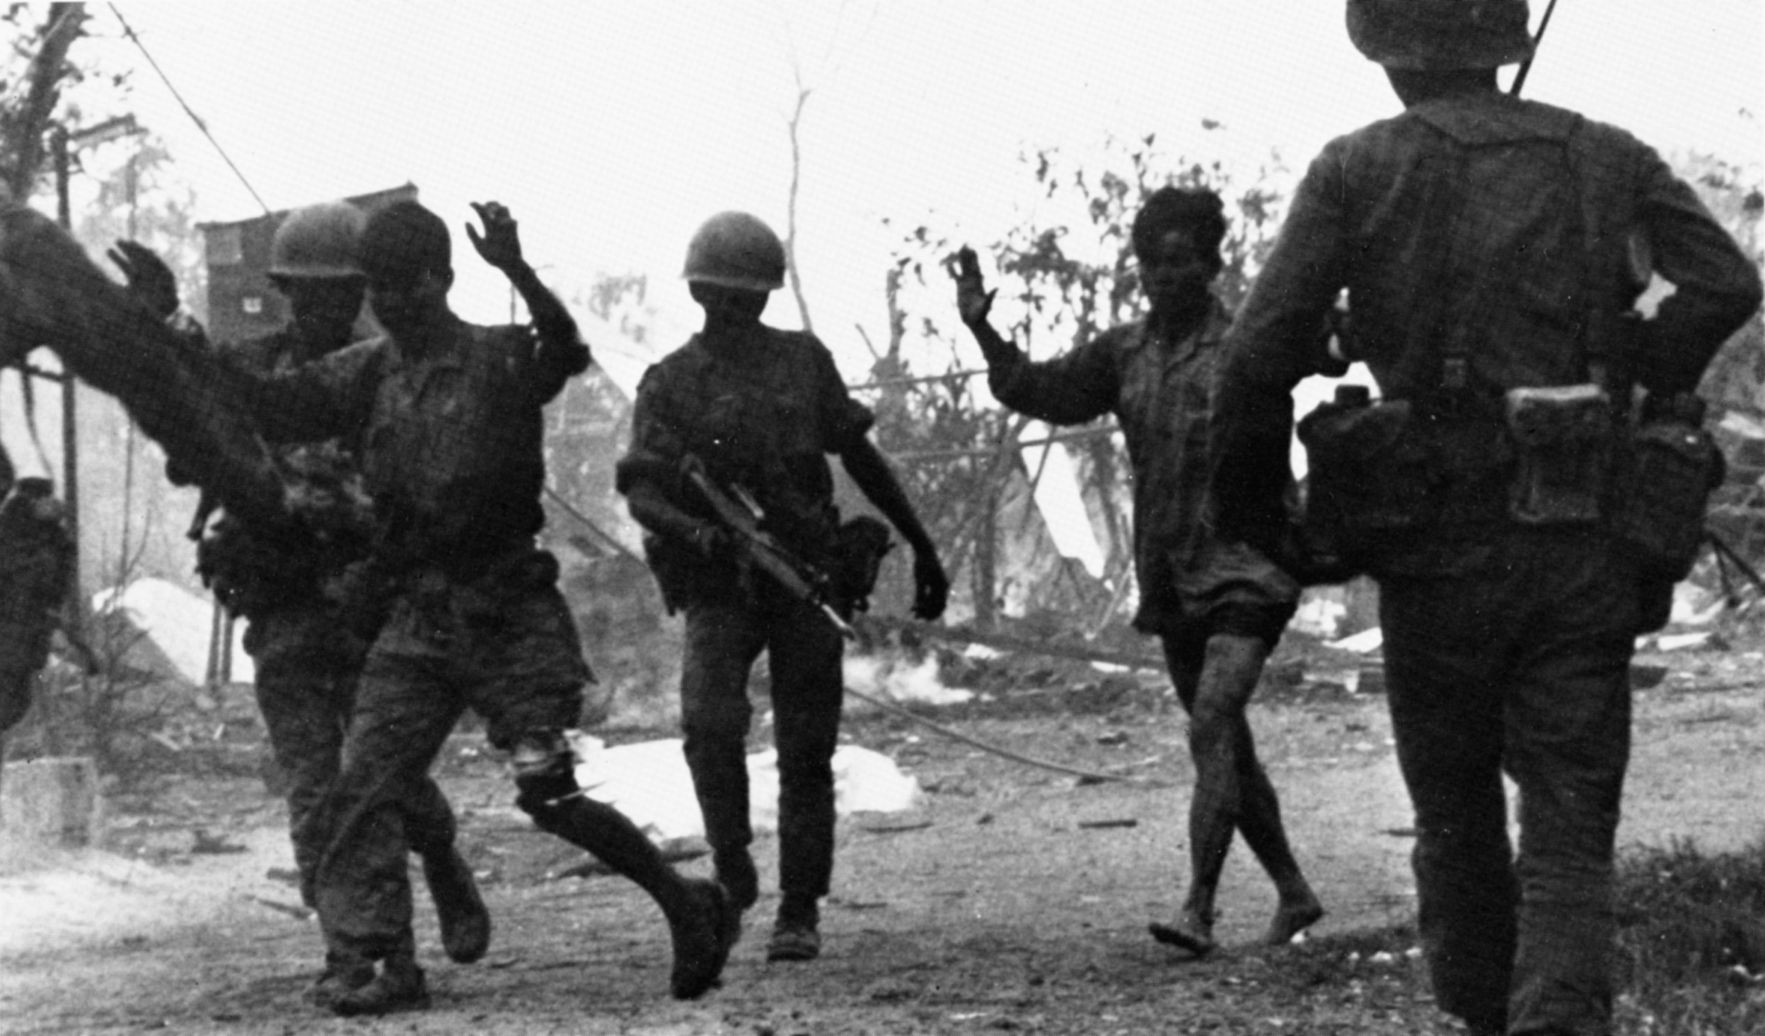 ARVN soldiers bring in North Vietnamese prisoners at the height of the battle.